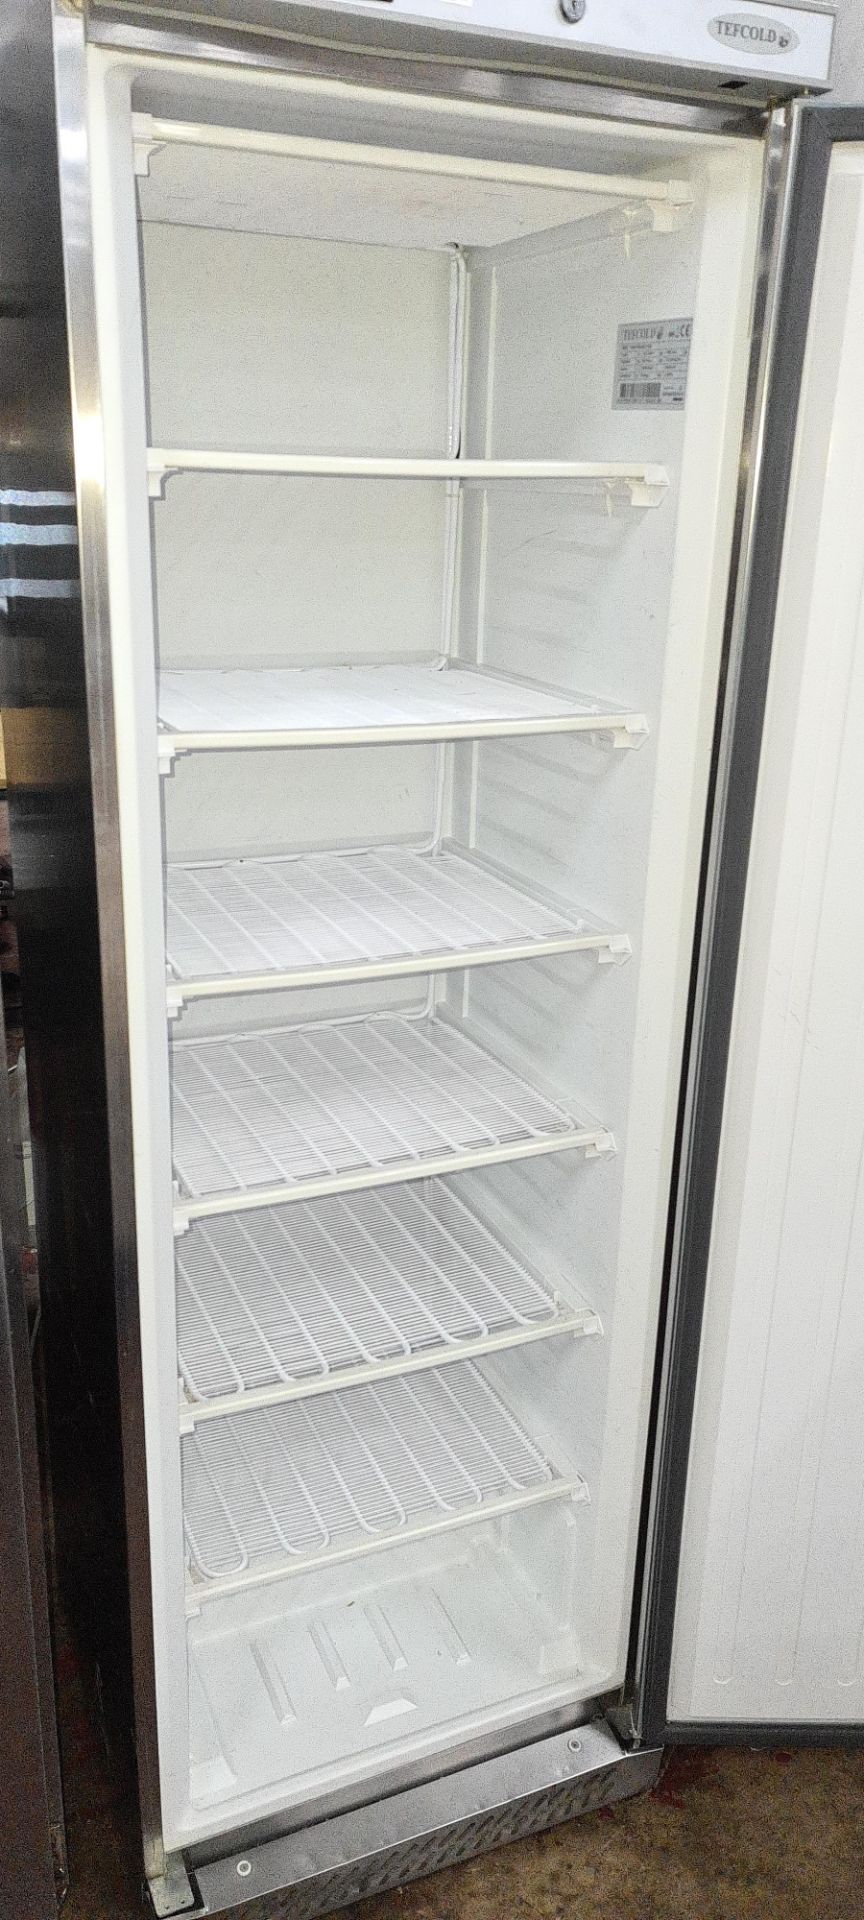 Tefcold UF400 silver tall single door freezer - Image 4 of 6